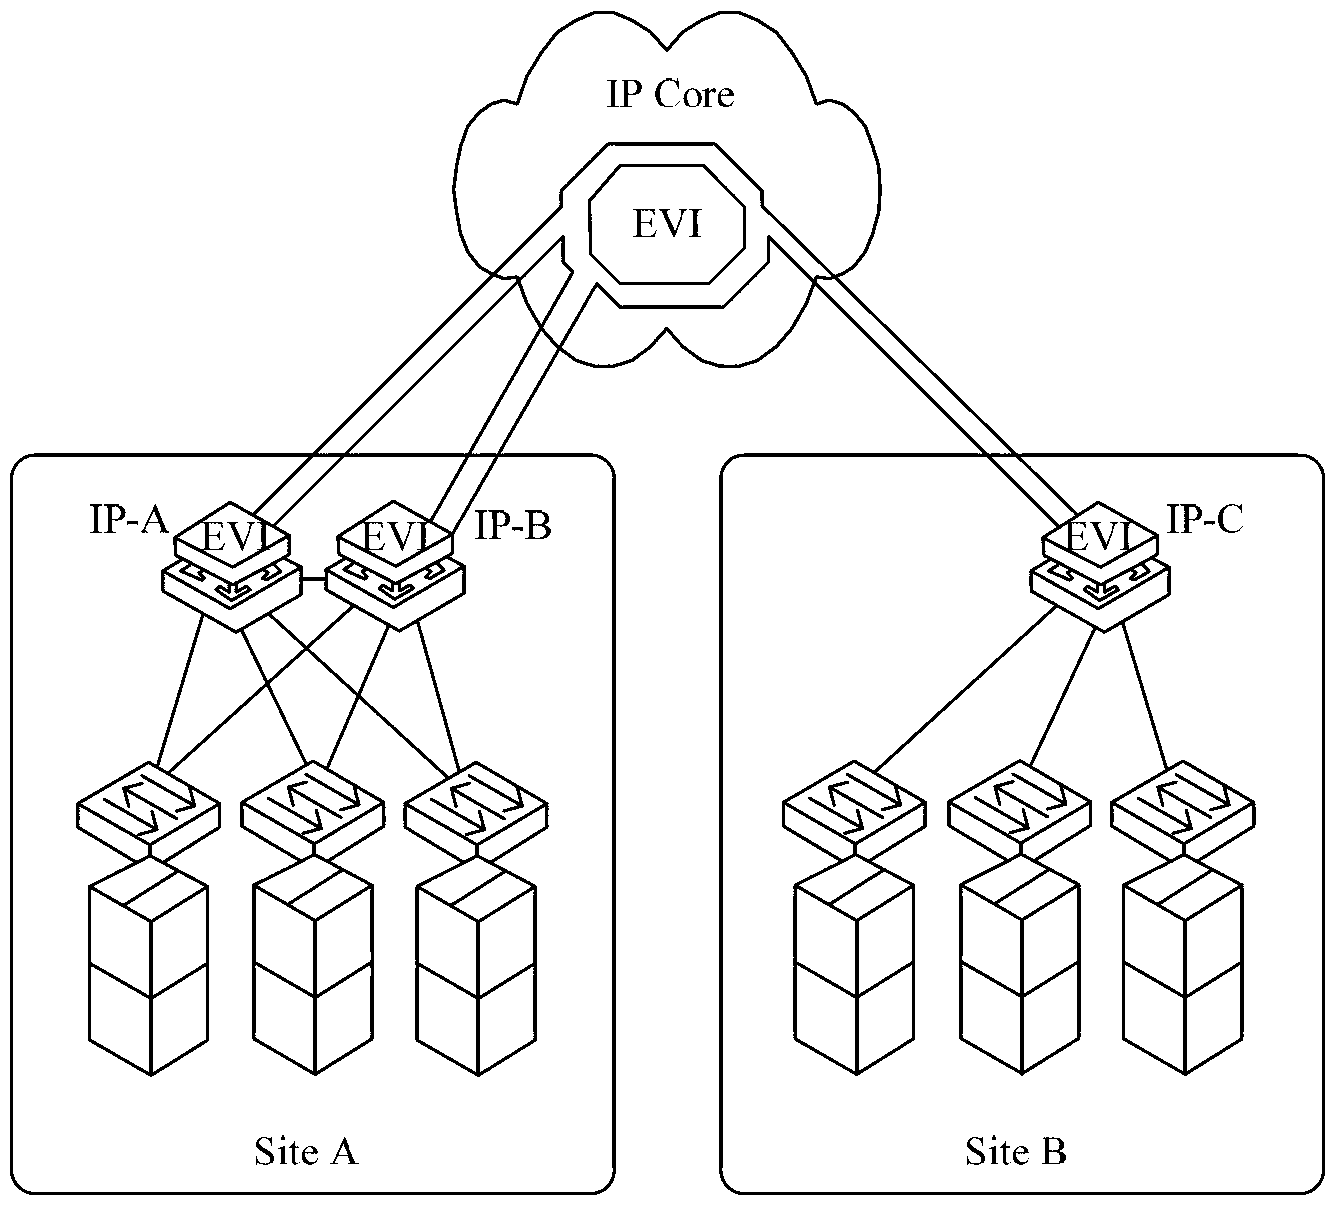 Method for activating VLAN (Virtual Local Area Network) negotiation and ED (edge device)